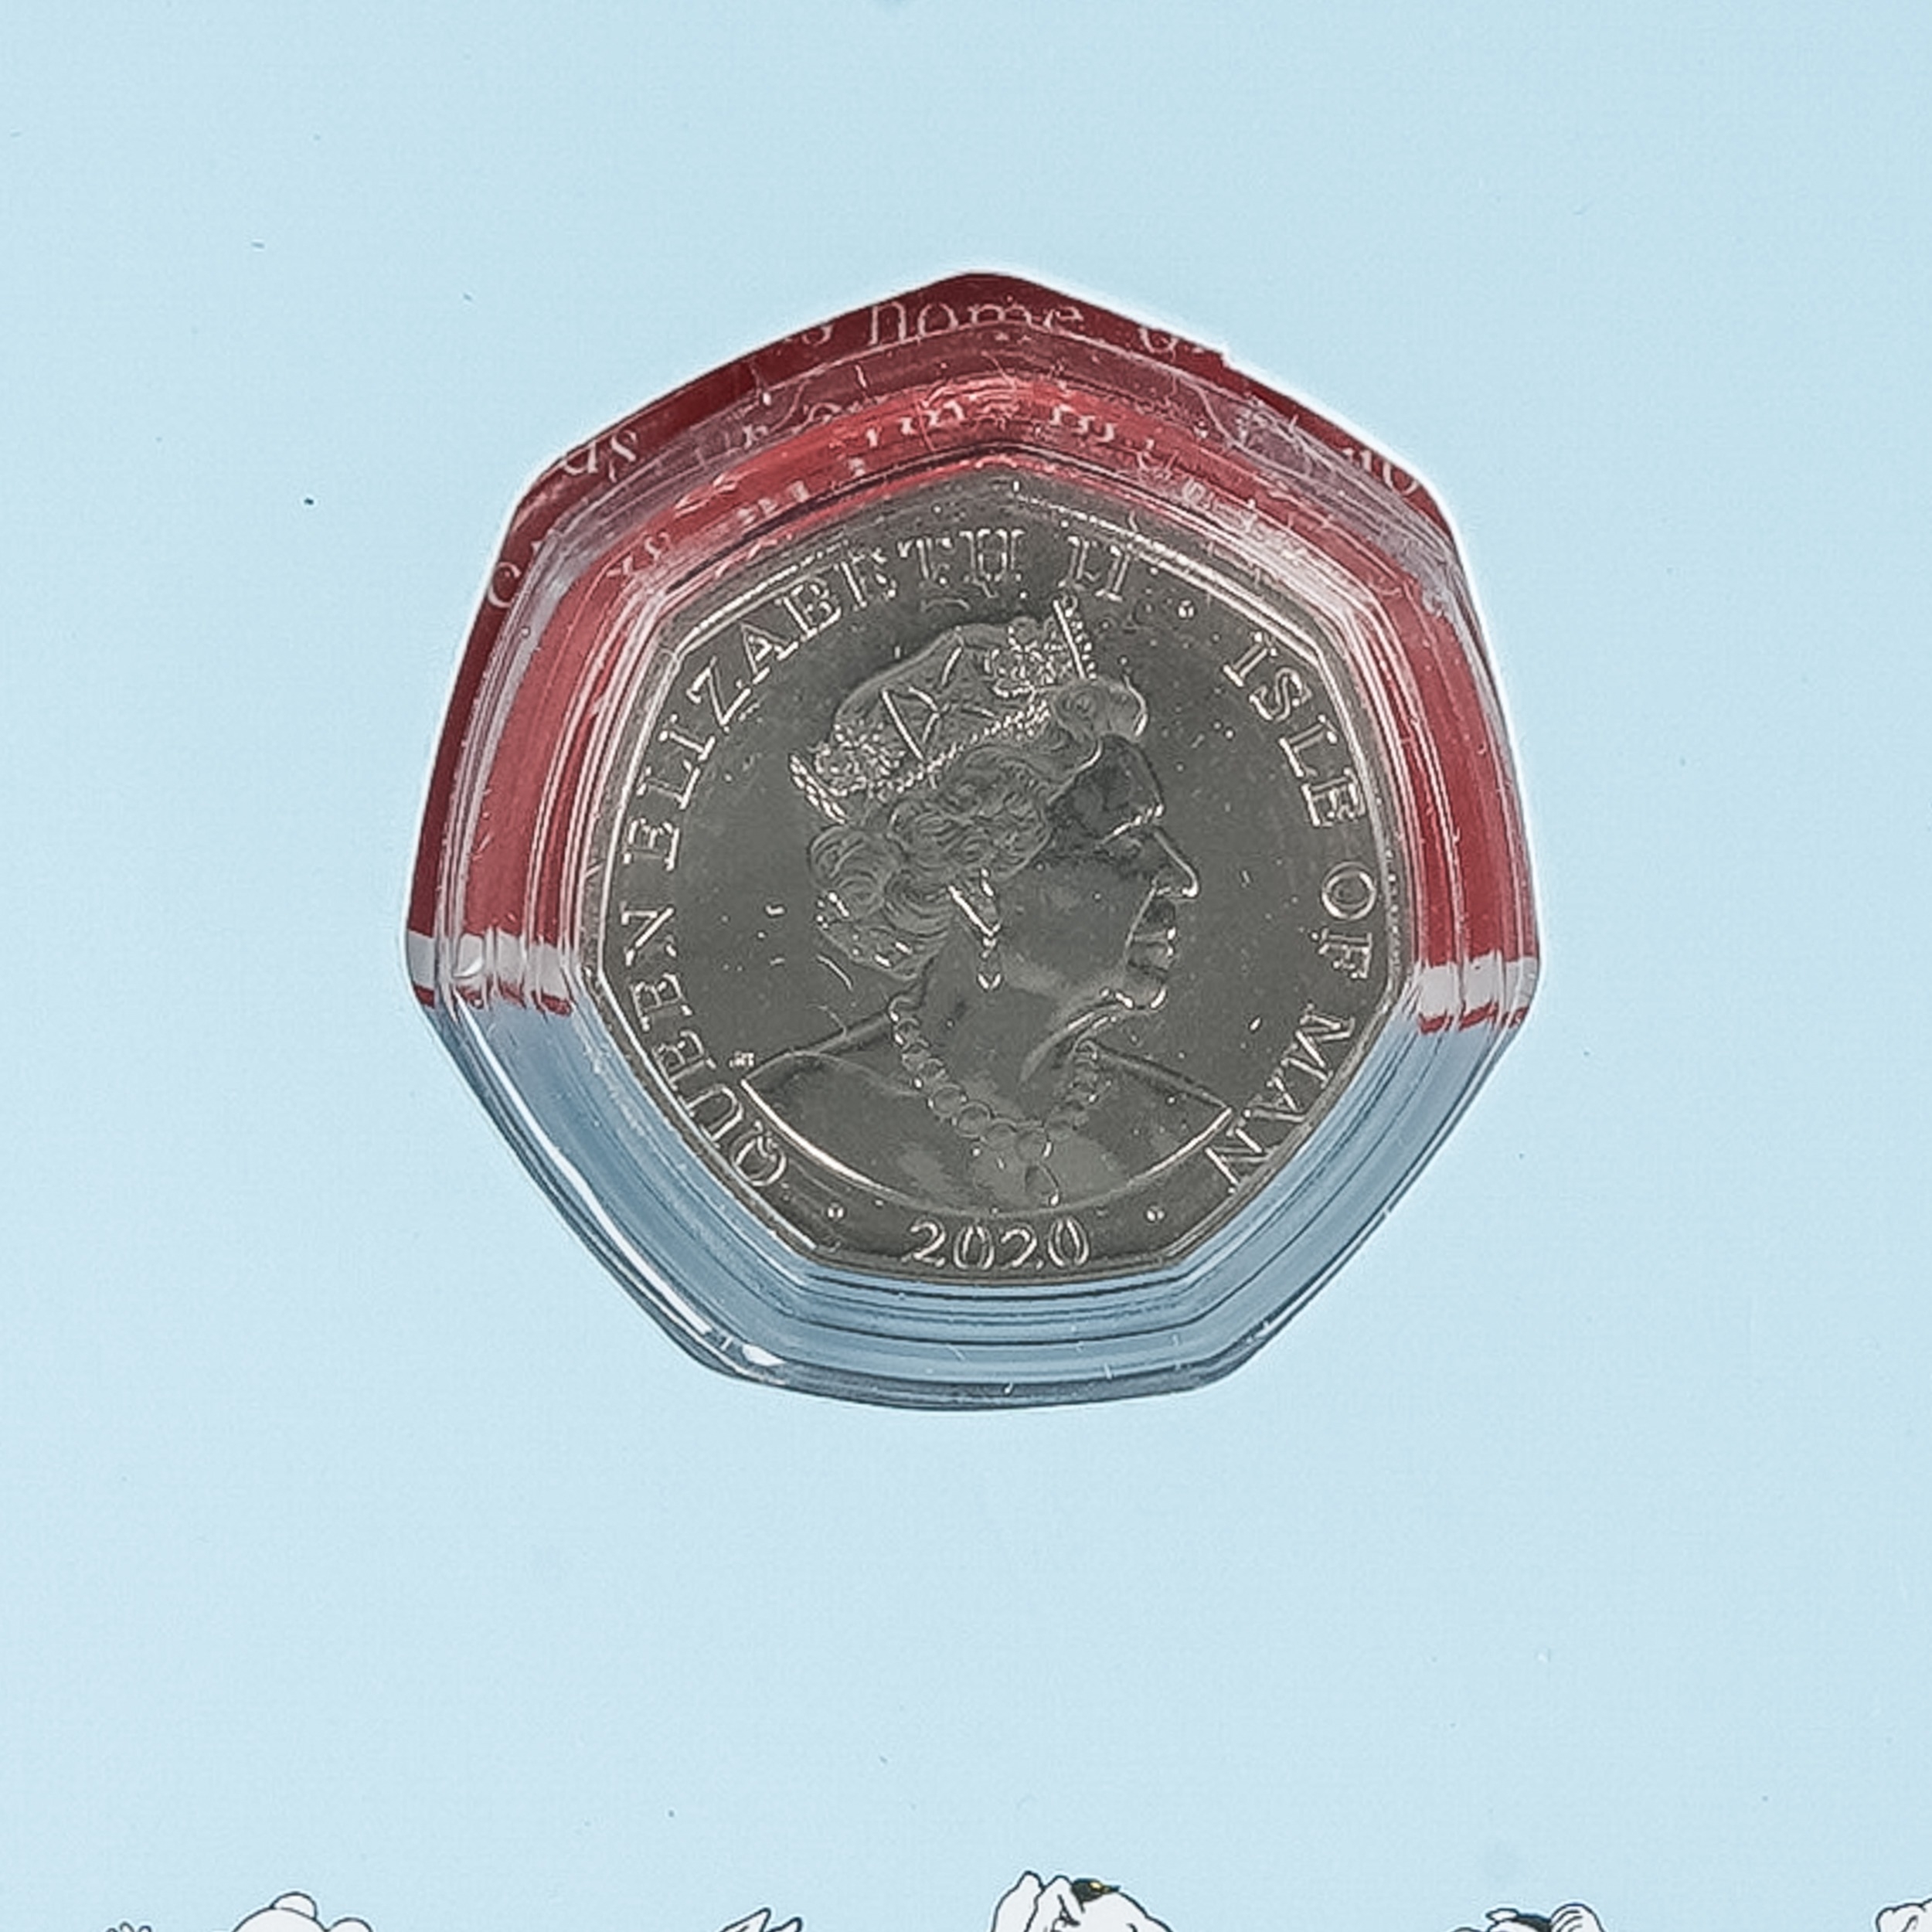 Rupert Bear: The 50p Coin Collection, with five encapsulated coins, comprising 'Rupert bear', 'Podgy - Image 4 of 4